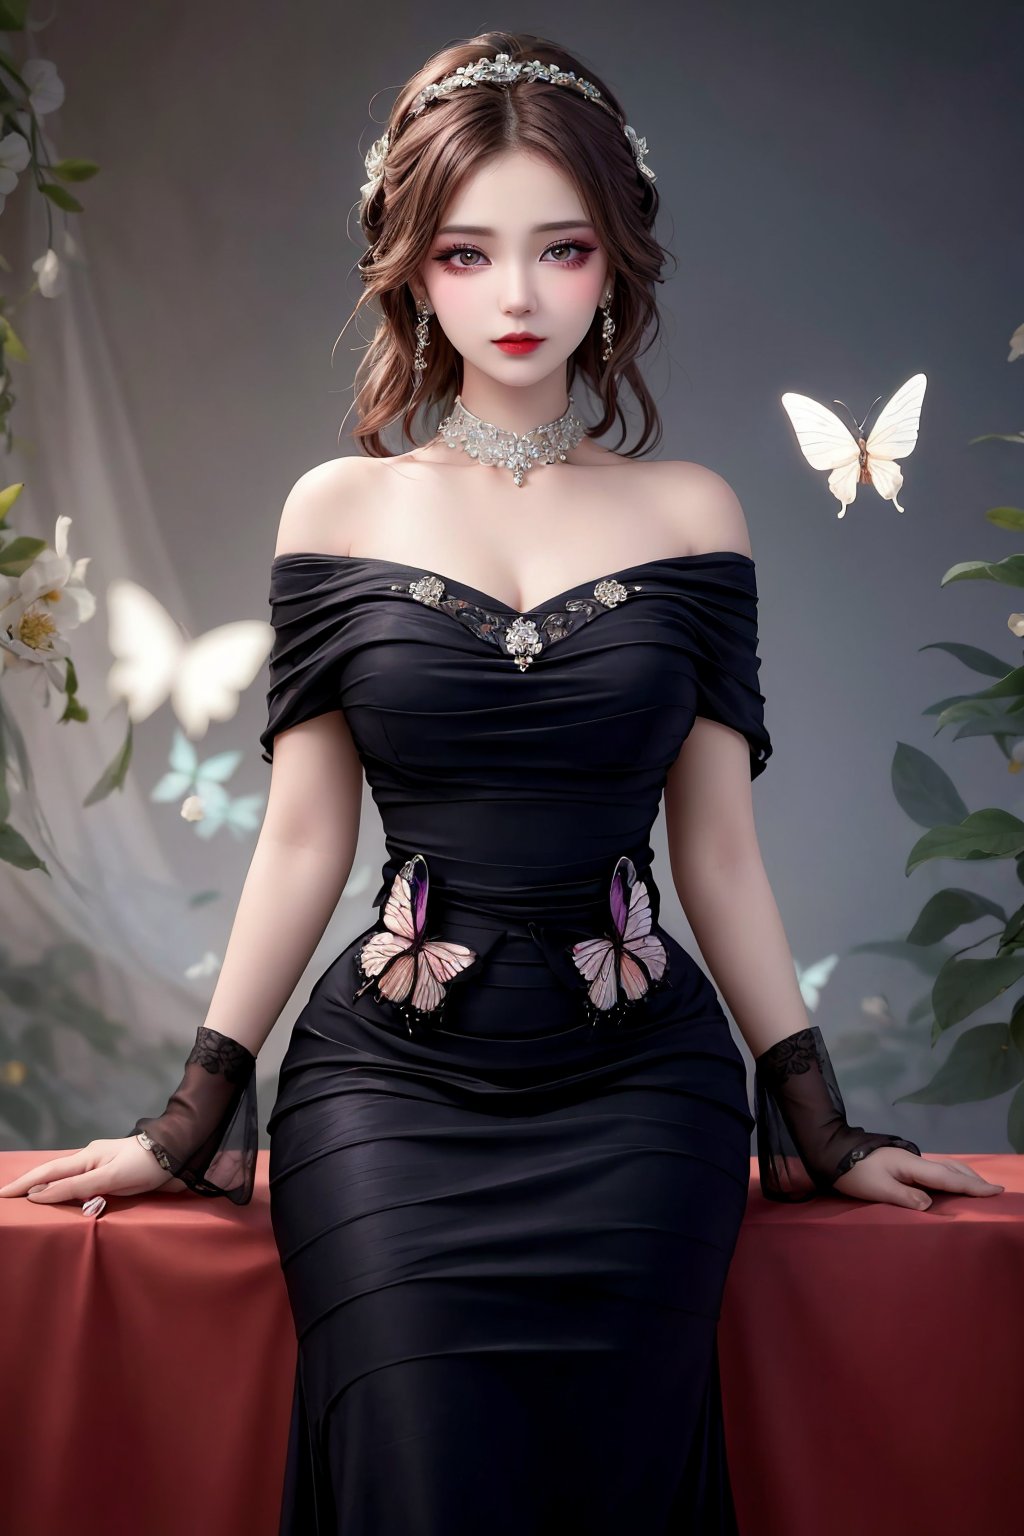 In a masterclass of Art Nouveau elegance, a stunning girl sits amidst a whirlwind of butterflies, her gaze piercing the viewer with an ethereal intensity. Dramatic lighting casts a warm glow on her fair skin, accentuating the delicate curves of her face and the subtle upturn of her lips. Dark red lipstick adds a pop of vibrancy to her features, while her eyes sparkle like gemstones, their intricate details rendered in hyper-realistic precision. Her raven tresses cascade down her back like a waterfall of night, framing her exquisite visage with a sense of depth and dimensionality. The butterflies, rendered in exquisite detail, appear to be suspended in mid-air, as if caught in the gentle breeze of her presence. The background, a blurred haze of photo-like quality, recedes into the distance, allowing the viewer's focus to remain on the masterpiece before them. The overall effect is one of breathtaking beauty, as if the very essence of art and wonder has been distilled into this single, unforgettable image.